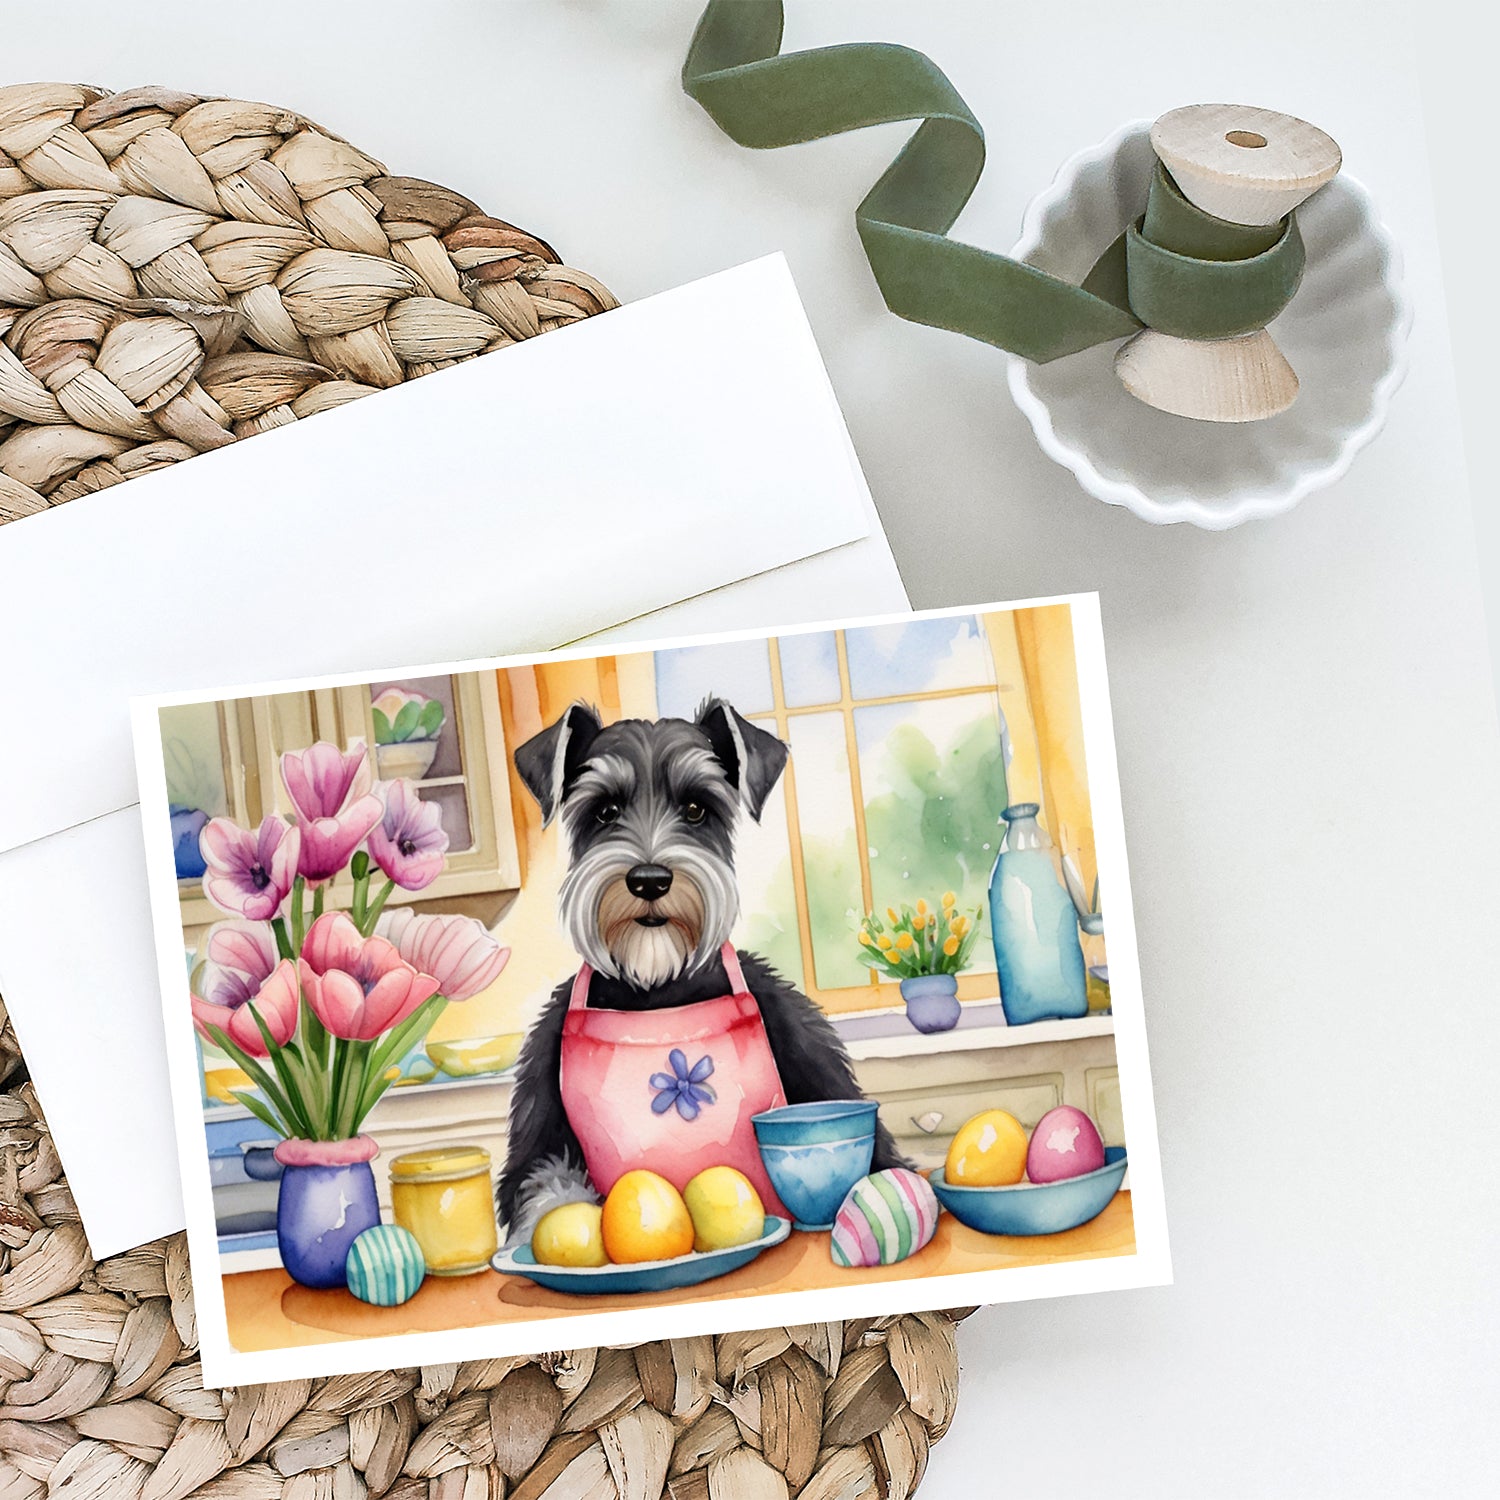 Buy this Decorating Easter Schnauzer Greeting Cards Pack of 8